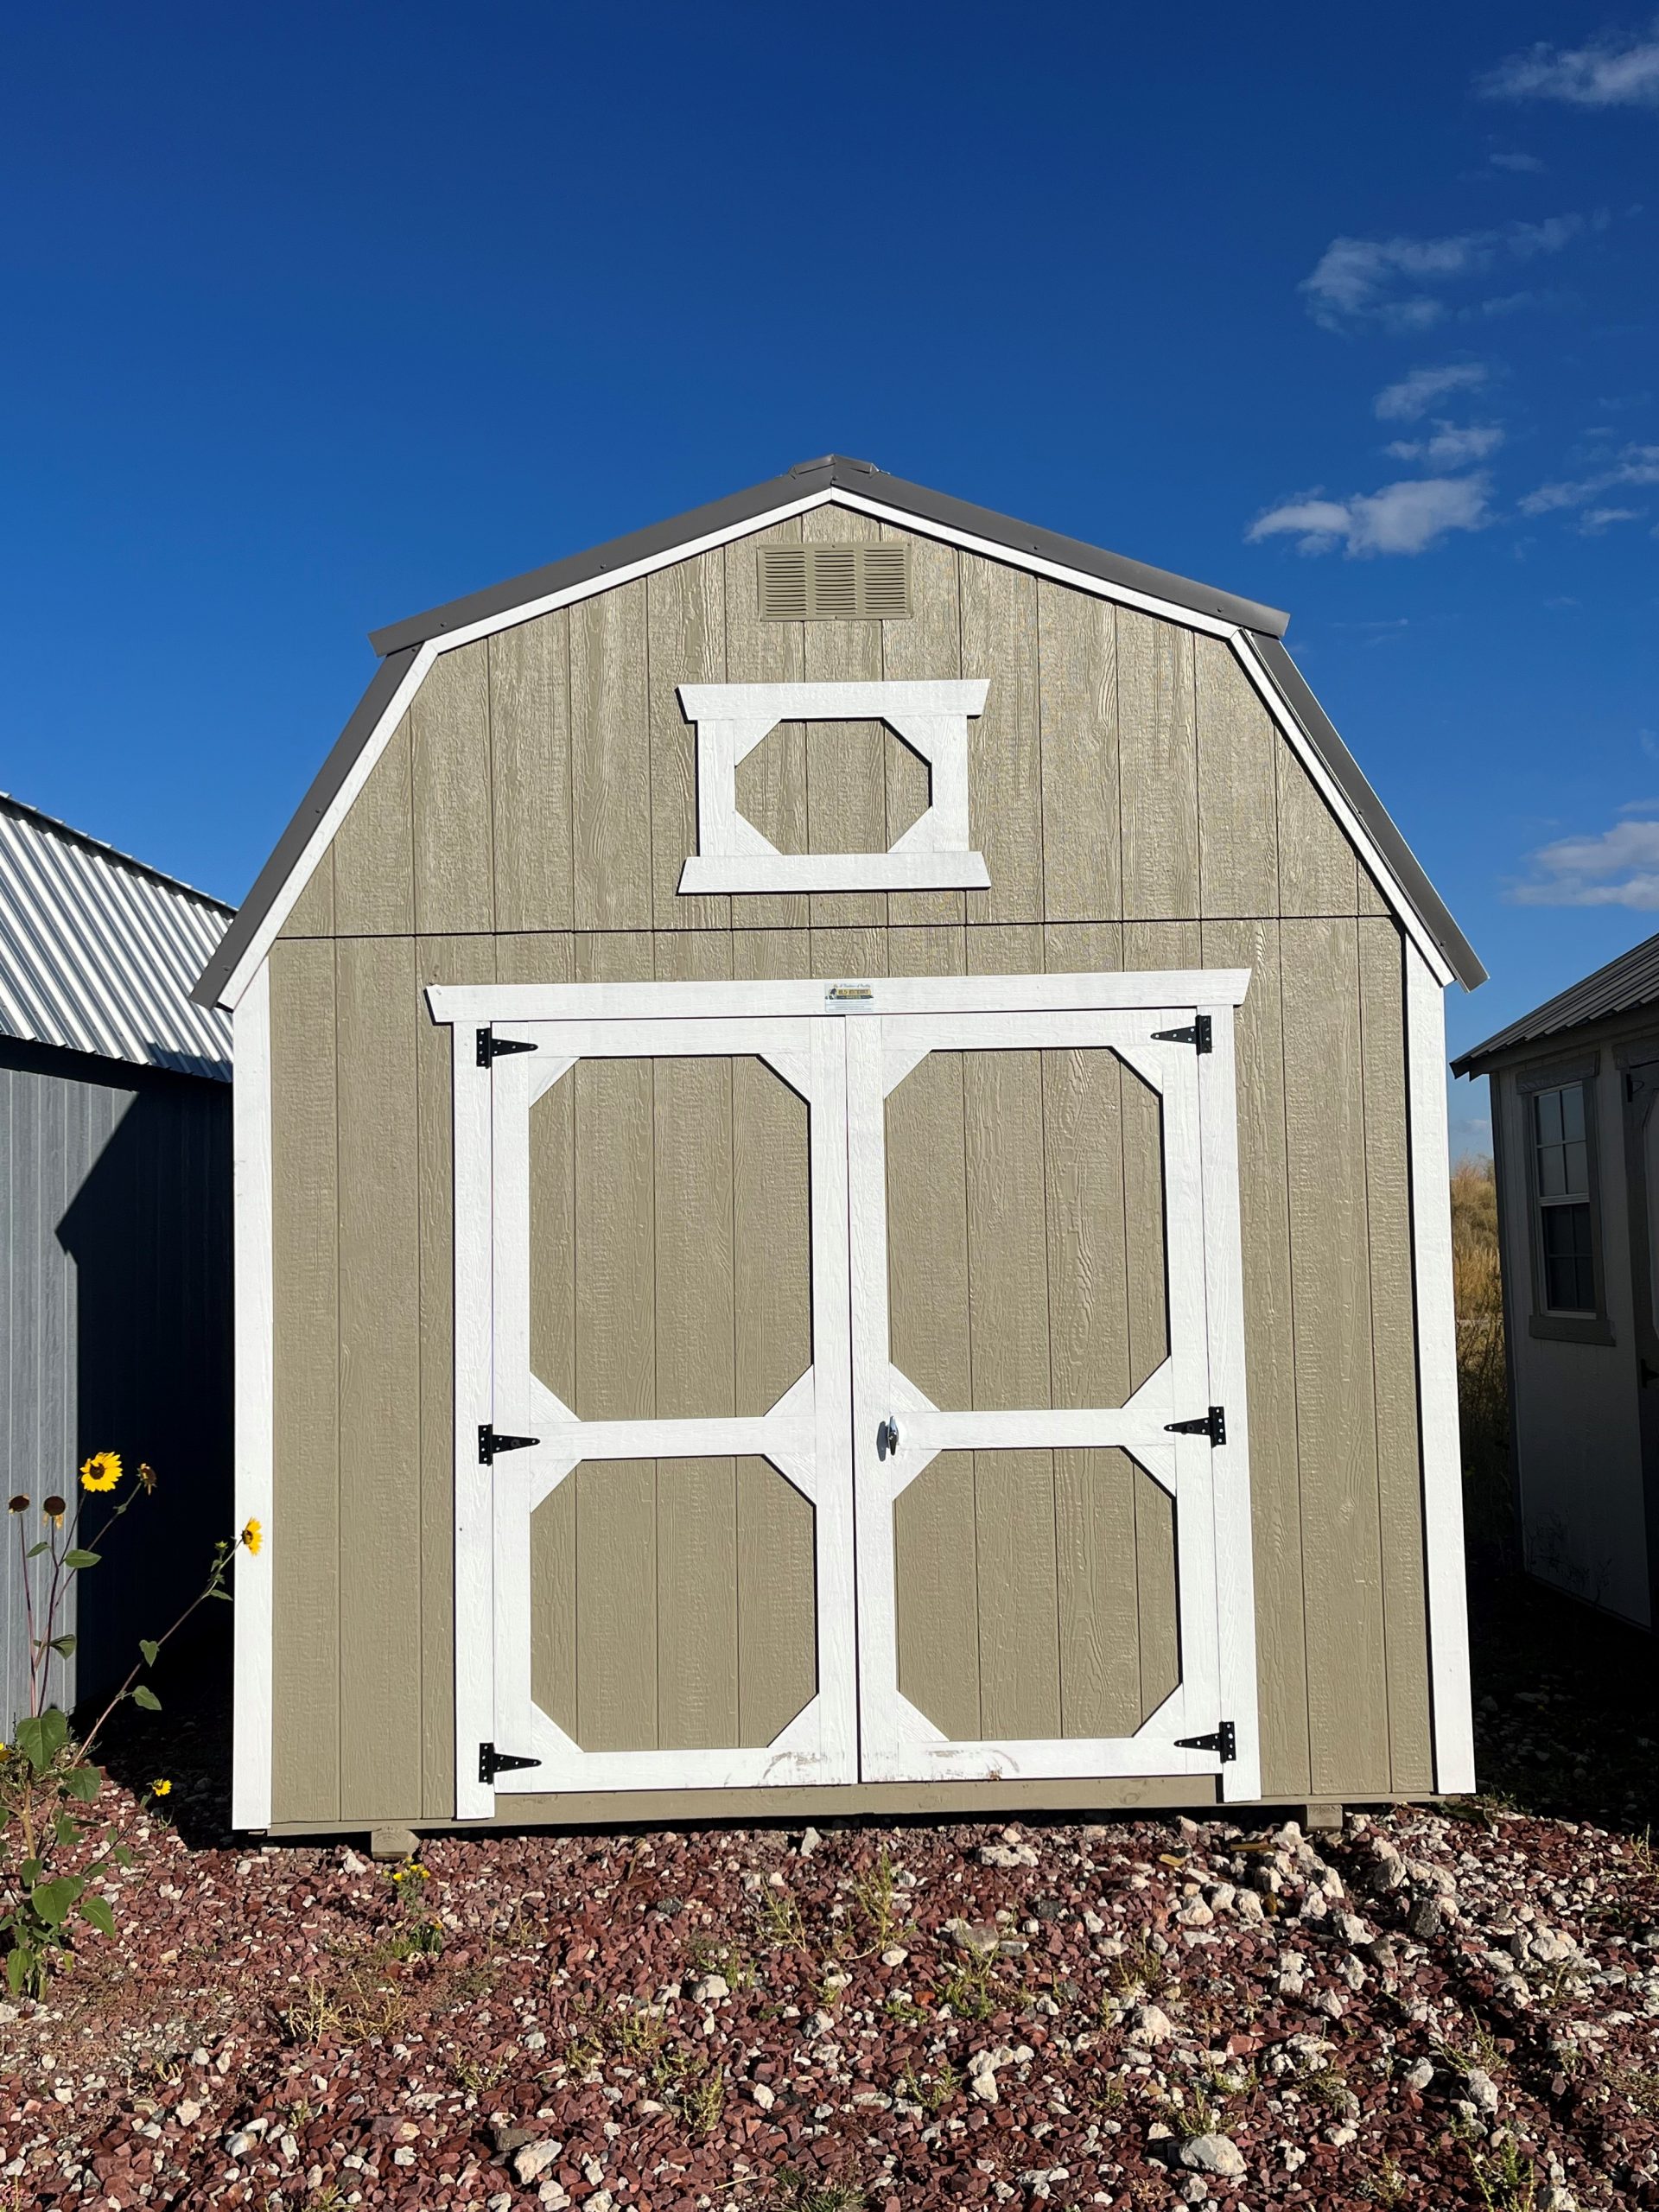 Buy Now 10×16 Lofted Barn Shed For Sale - Clay Paint, Barn White Trim or Order at French Creek Designs Shed Sales, Casper, WY